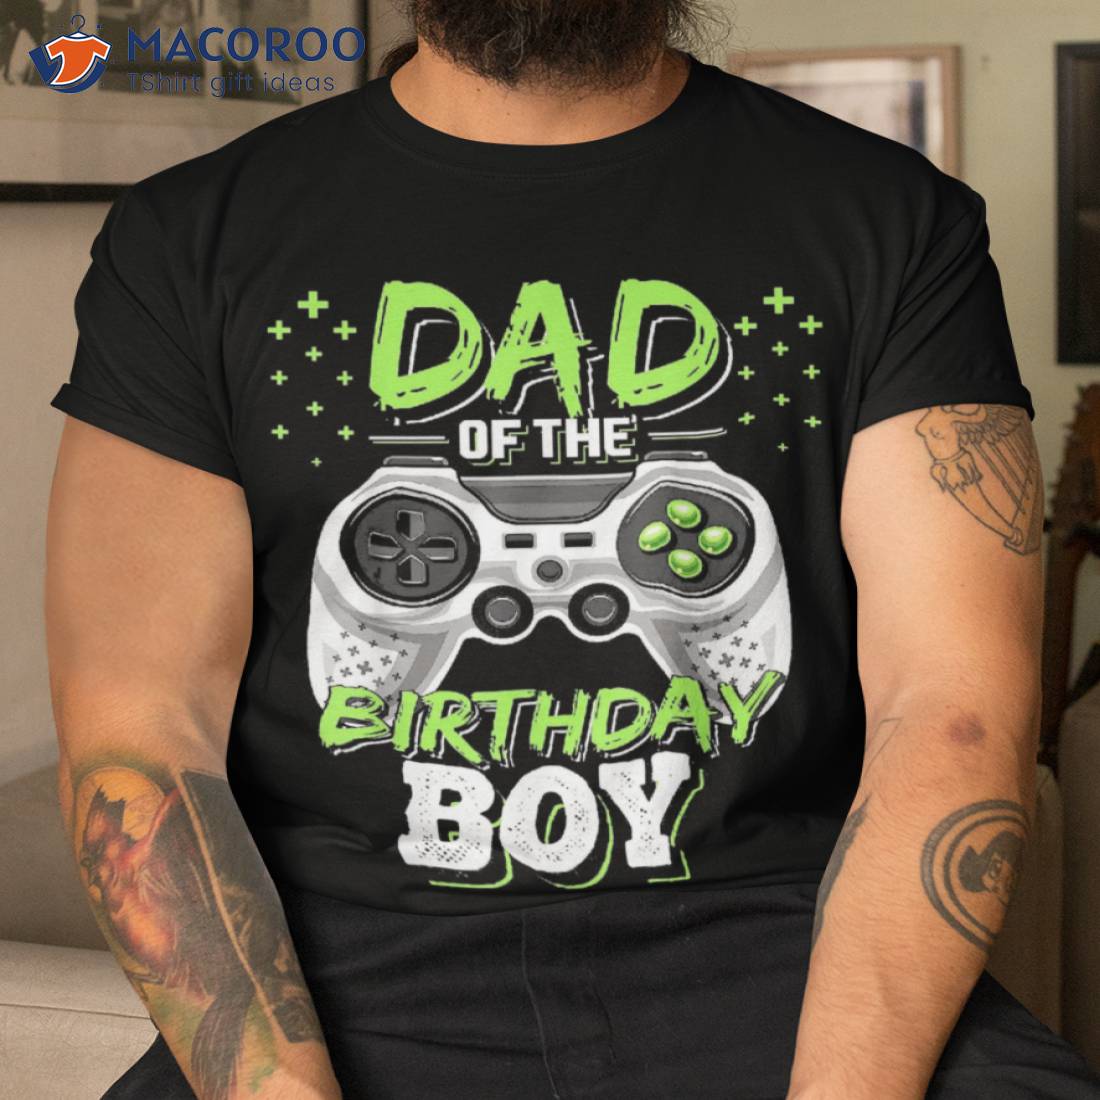 25 Best Birthday Gifts for Christian Dad - GiftLab24